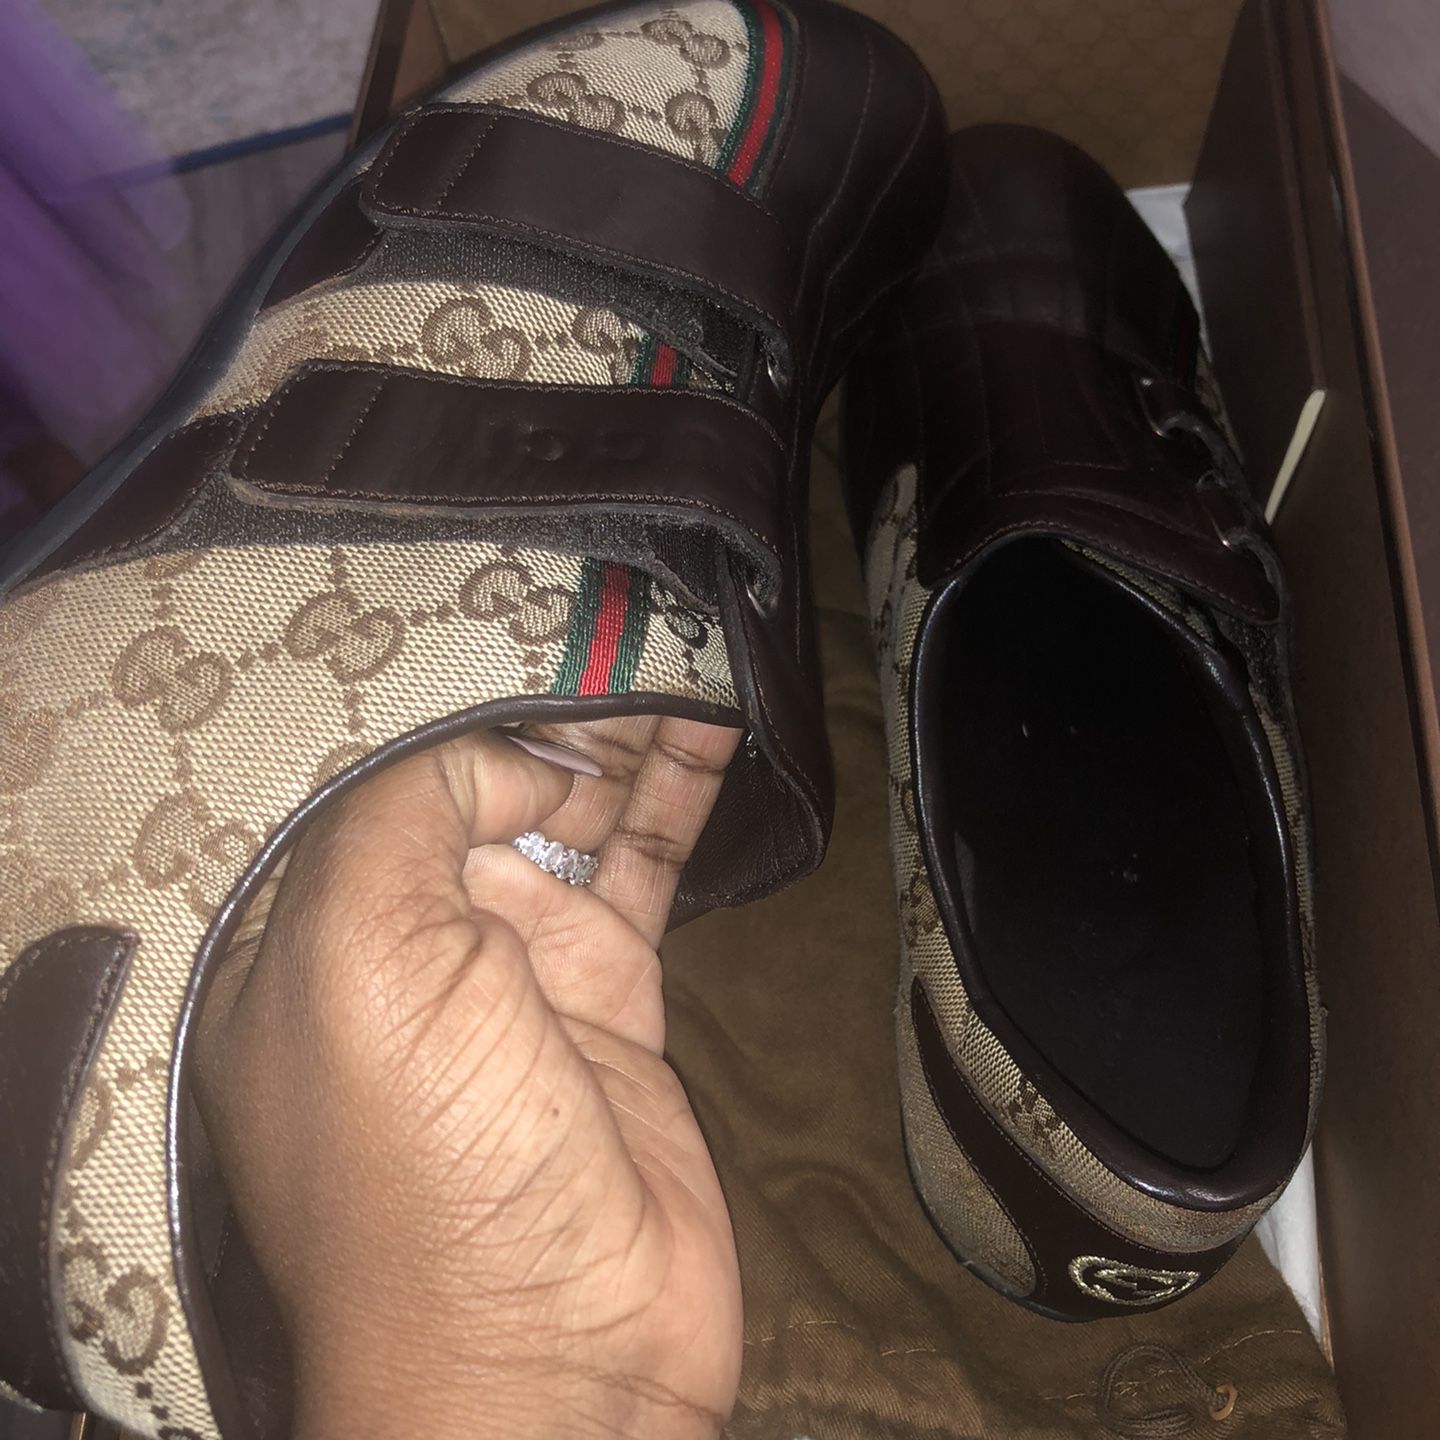 Designer Gucci Shoes for Sale in East Liberty, PA - OfferUp